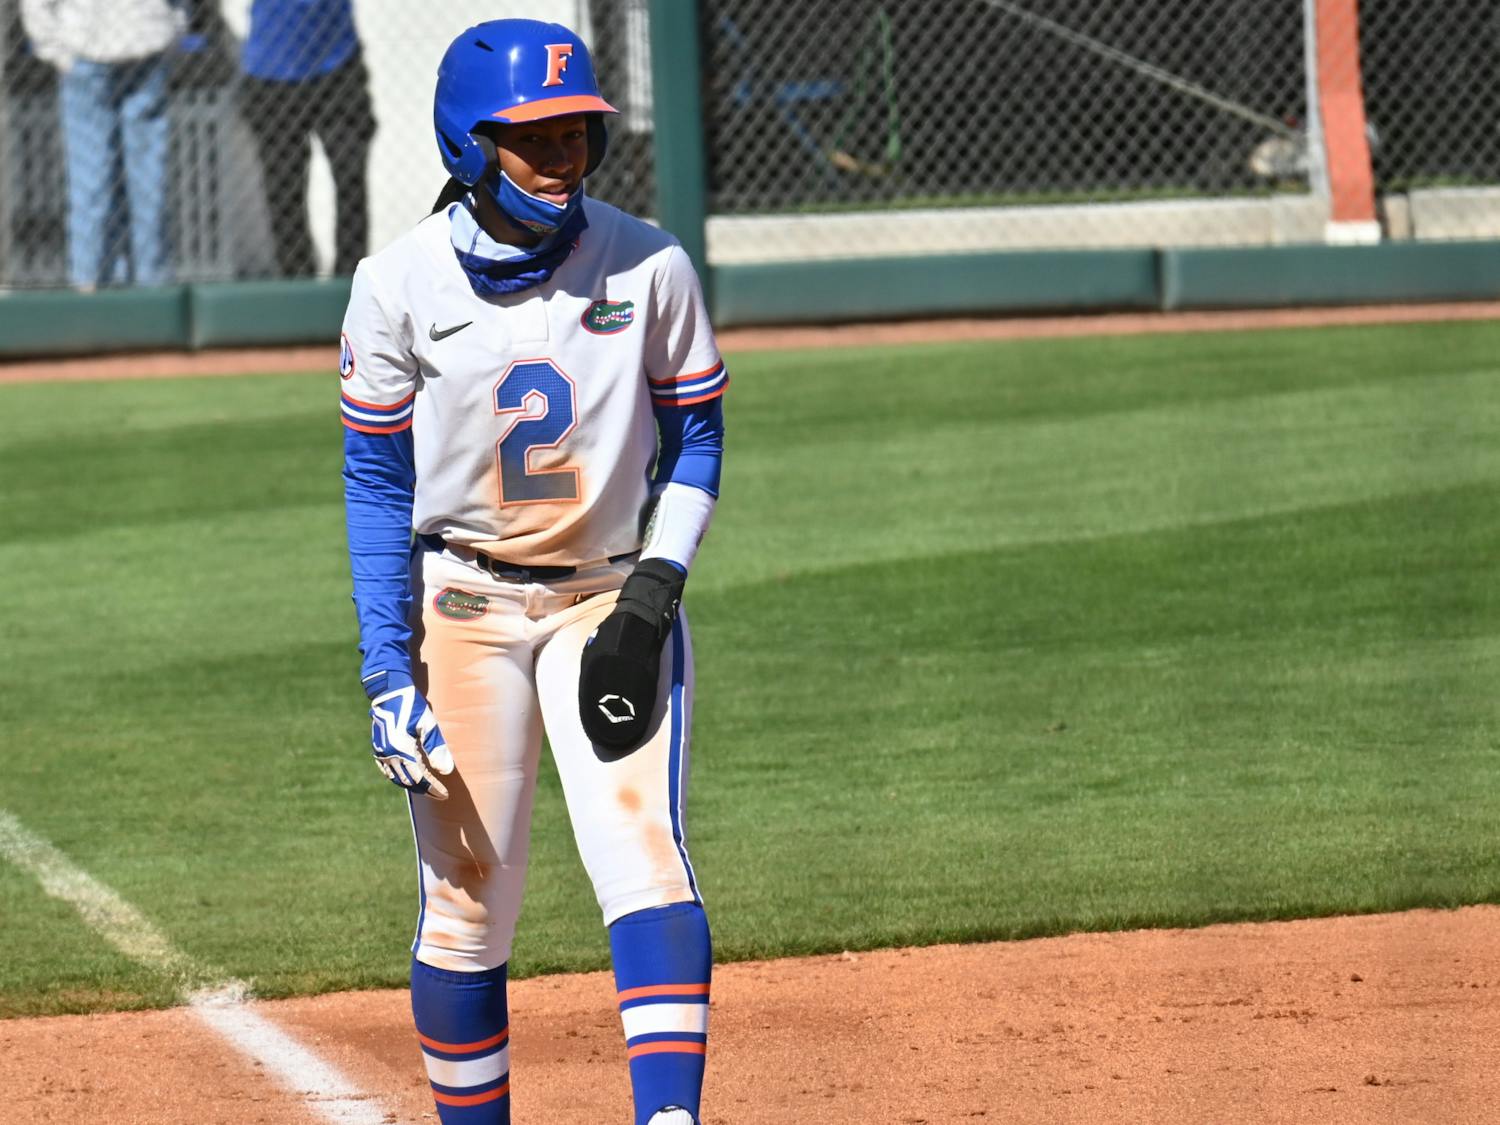 Florida center fielder Cheyenne Lindsey smacked a single down the first base line to drive in two runs Saturday. Photo from UF-Charleston game Feb. 20.